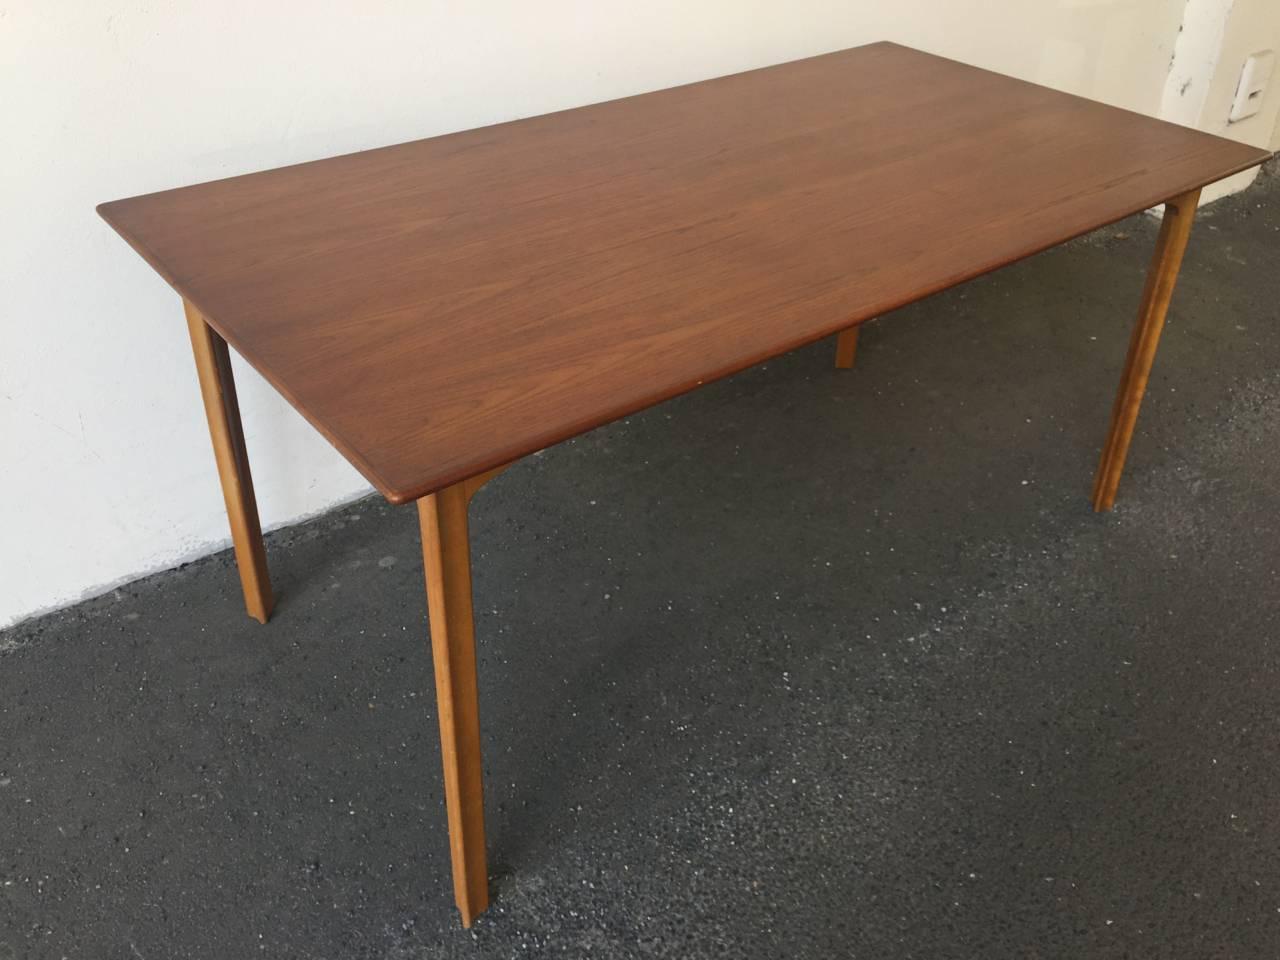 Arne Jacobsen Grand Prix Dining Table or Desk In Excellent Condition For Sale In Munich, DE